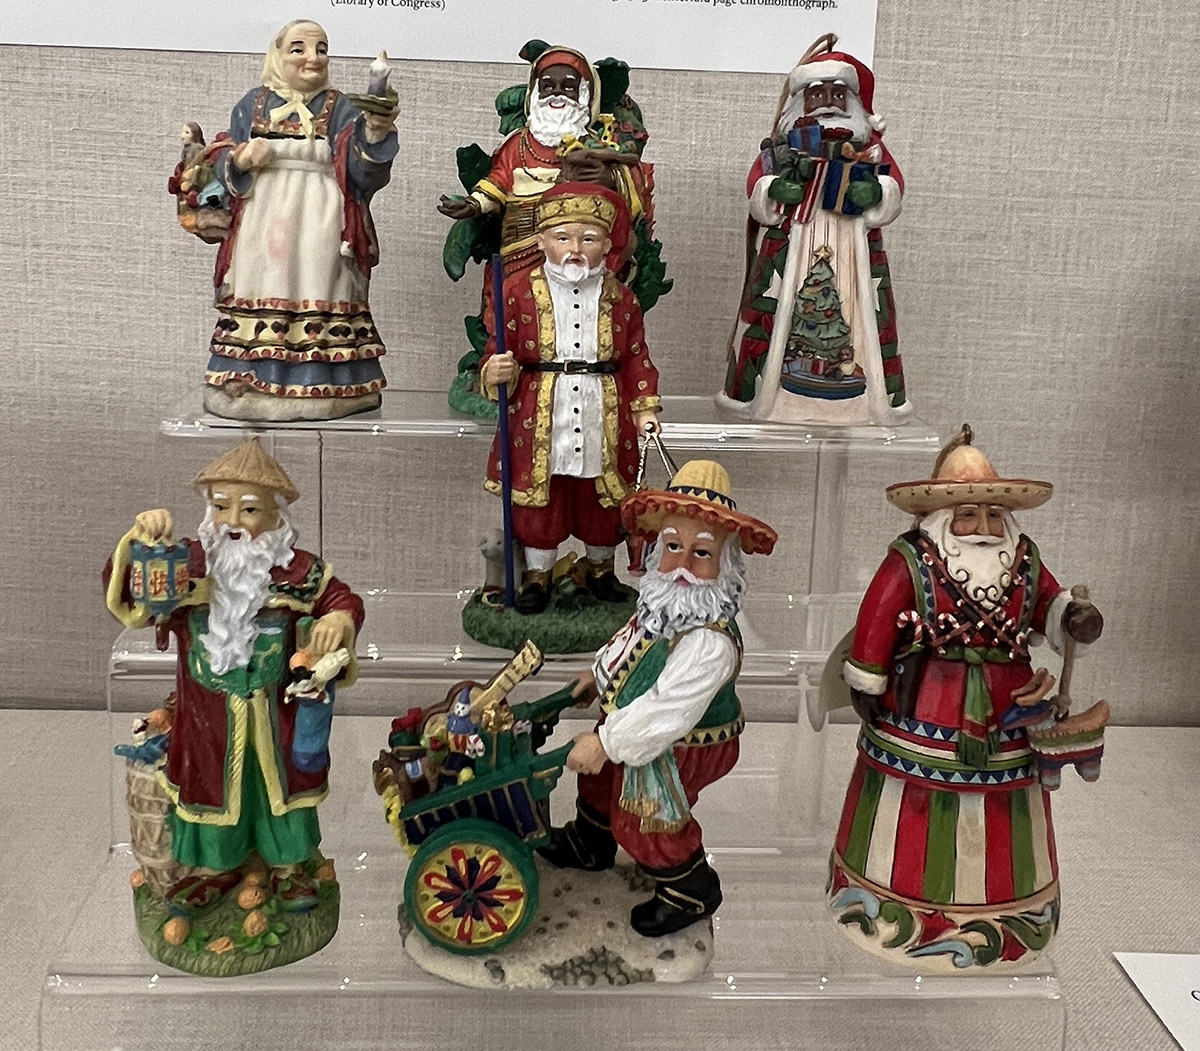 Seven figurines of Santa Claus of varying ethnicities and garments.